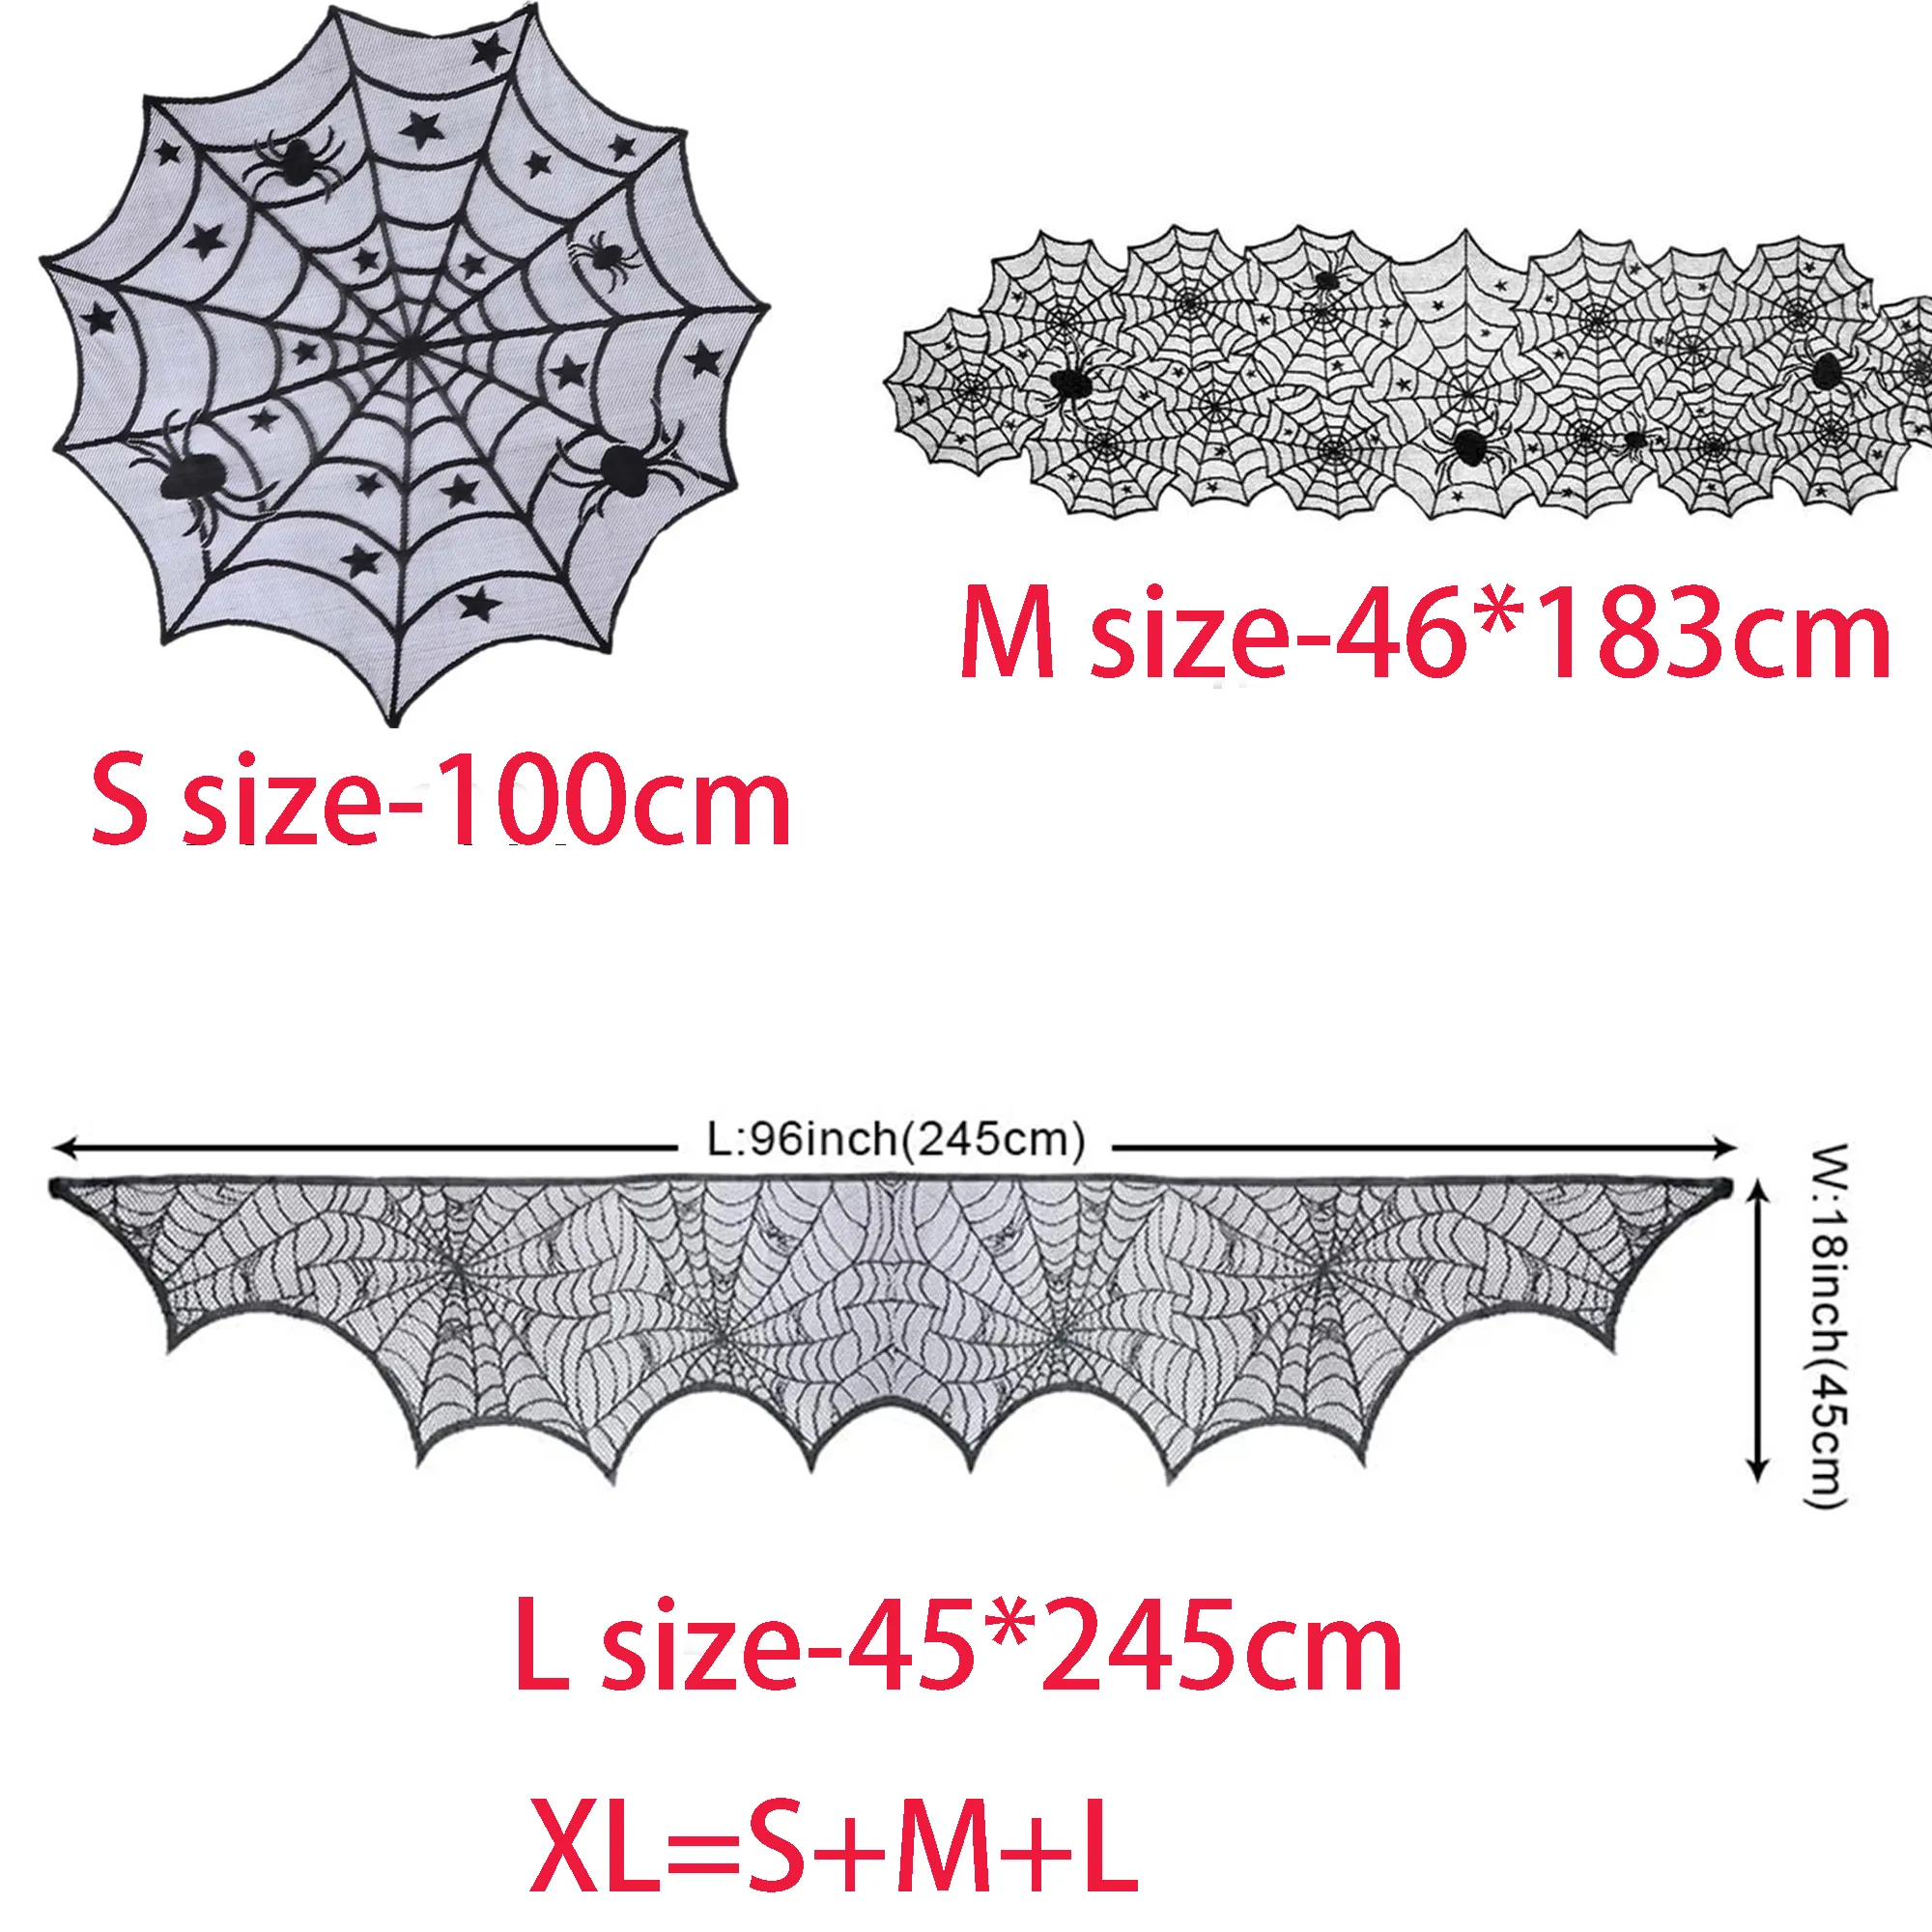 1-pack/3-pack Halloween Cobweb Decorations Spider Web Fireplace Mantel Scarf & Round Table Cover & Tablecloth For Halloween Party Decor